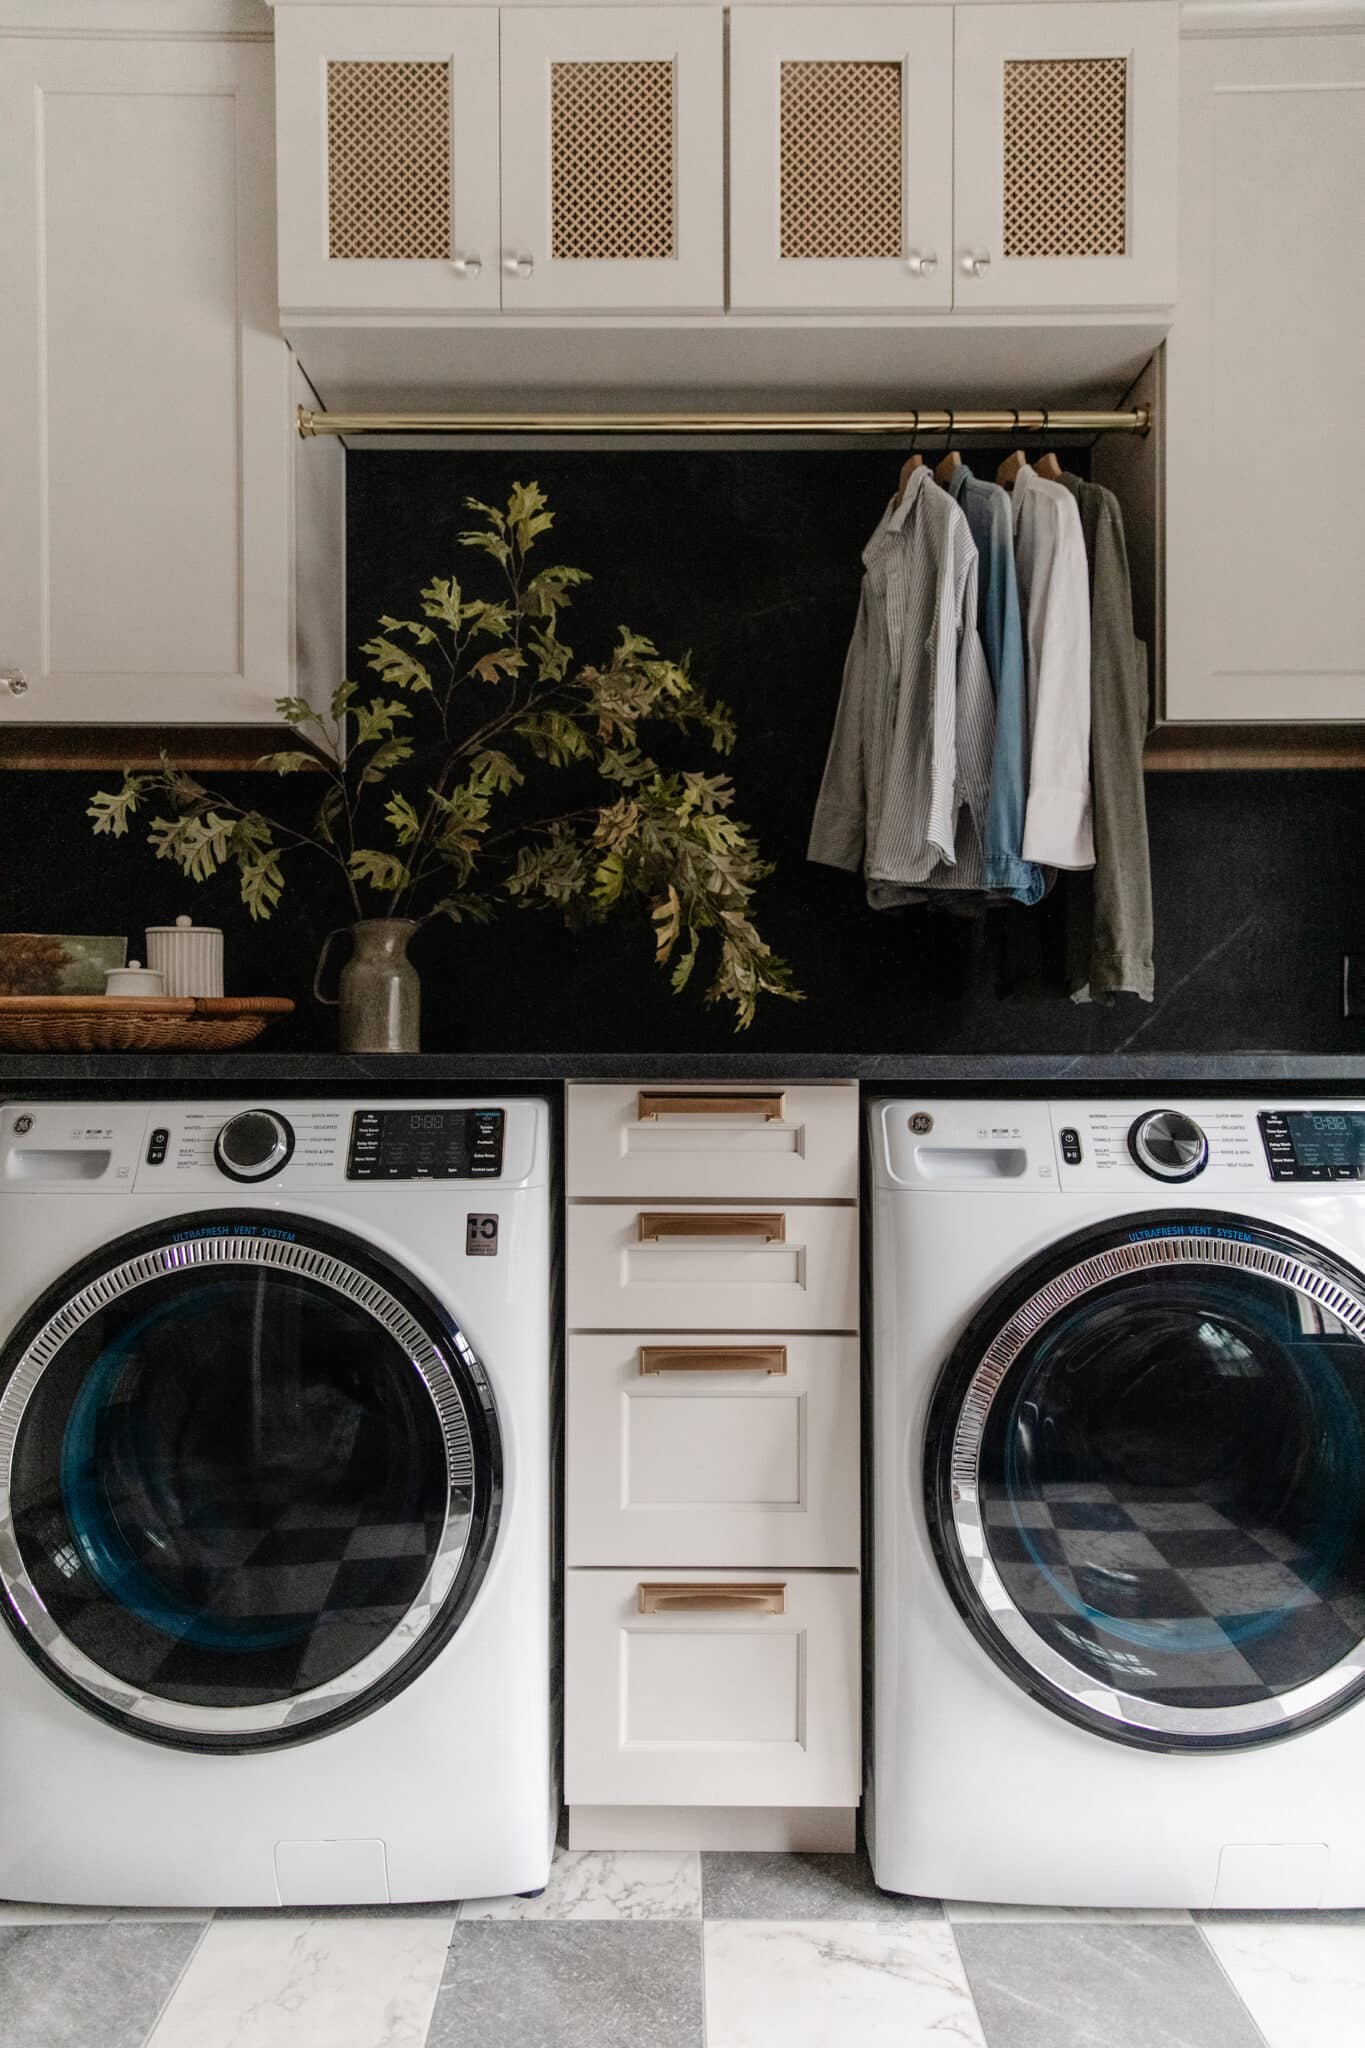 Reveal: The Long-Awaited Modern Colonial Laundry Room - Chris